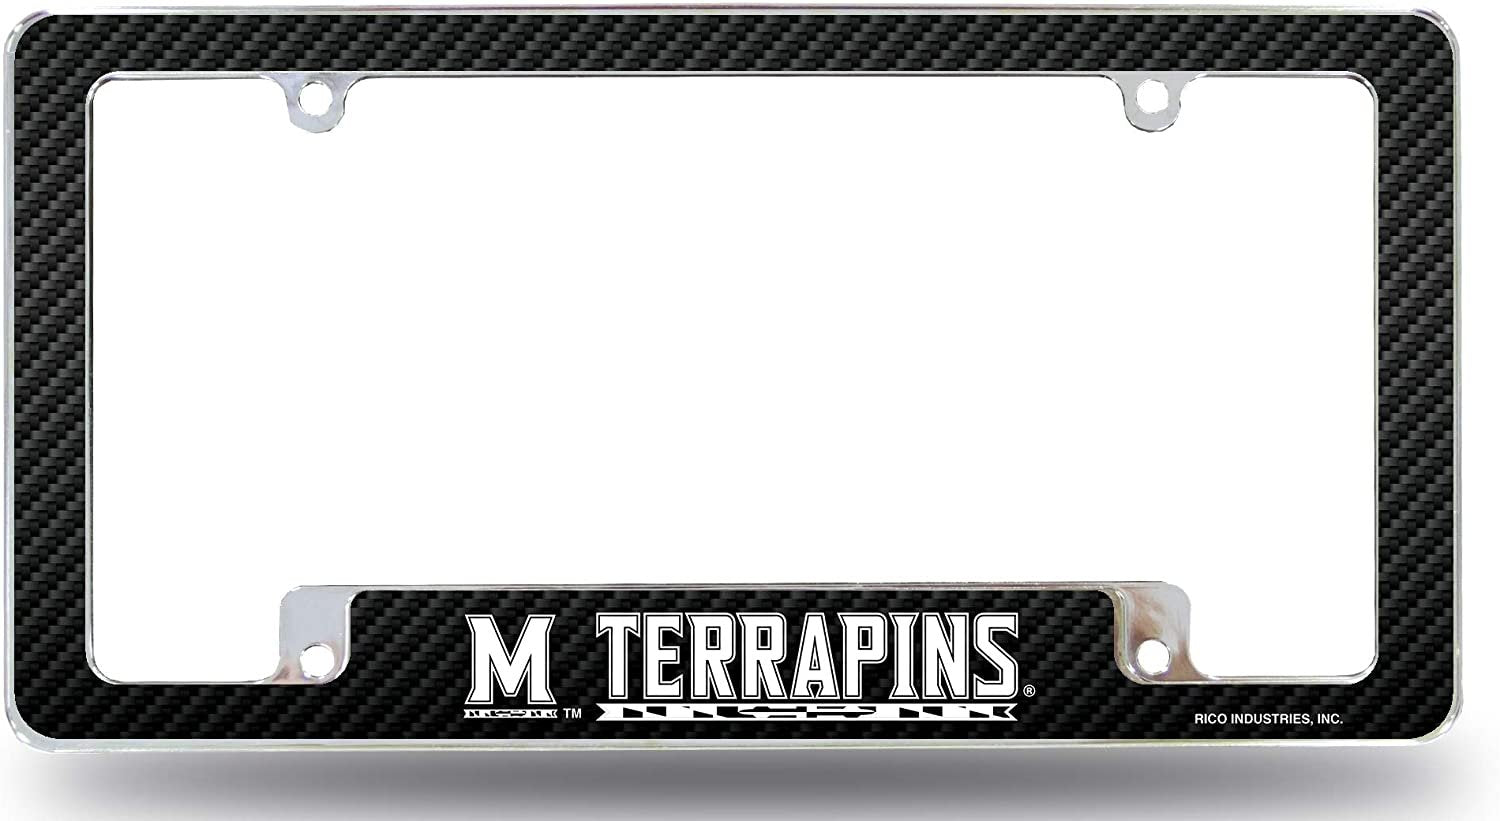 University of Maryland Terrapins Metal License Plate Frame Chrome Tag Cover, Carbon Fiber Design, 12x6 Inch